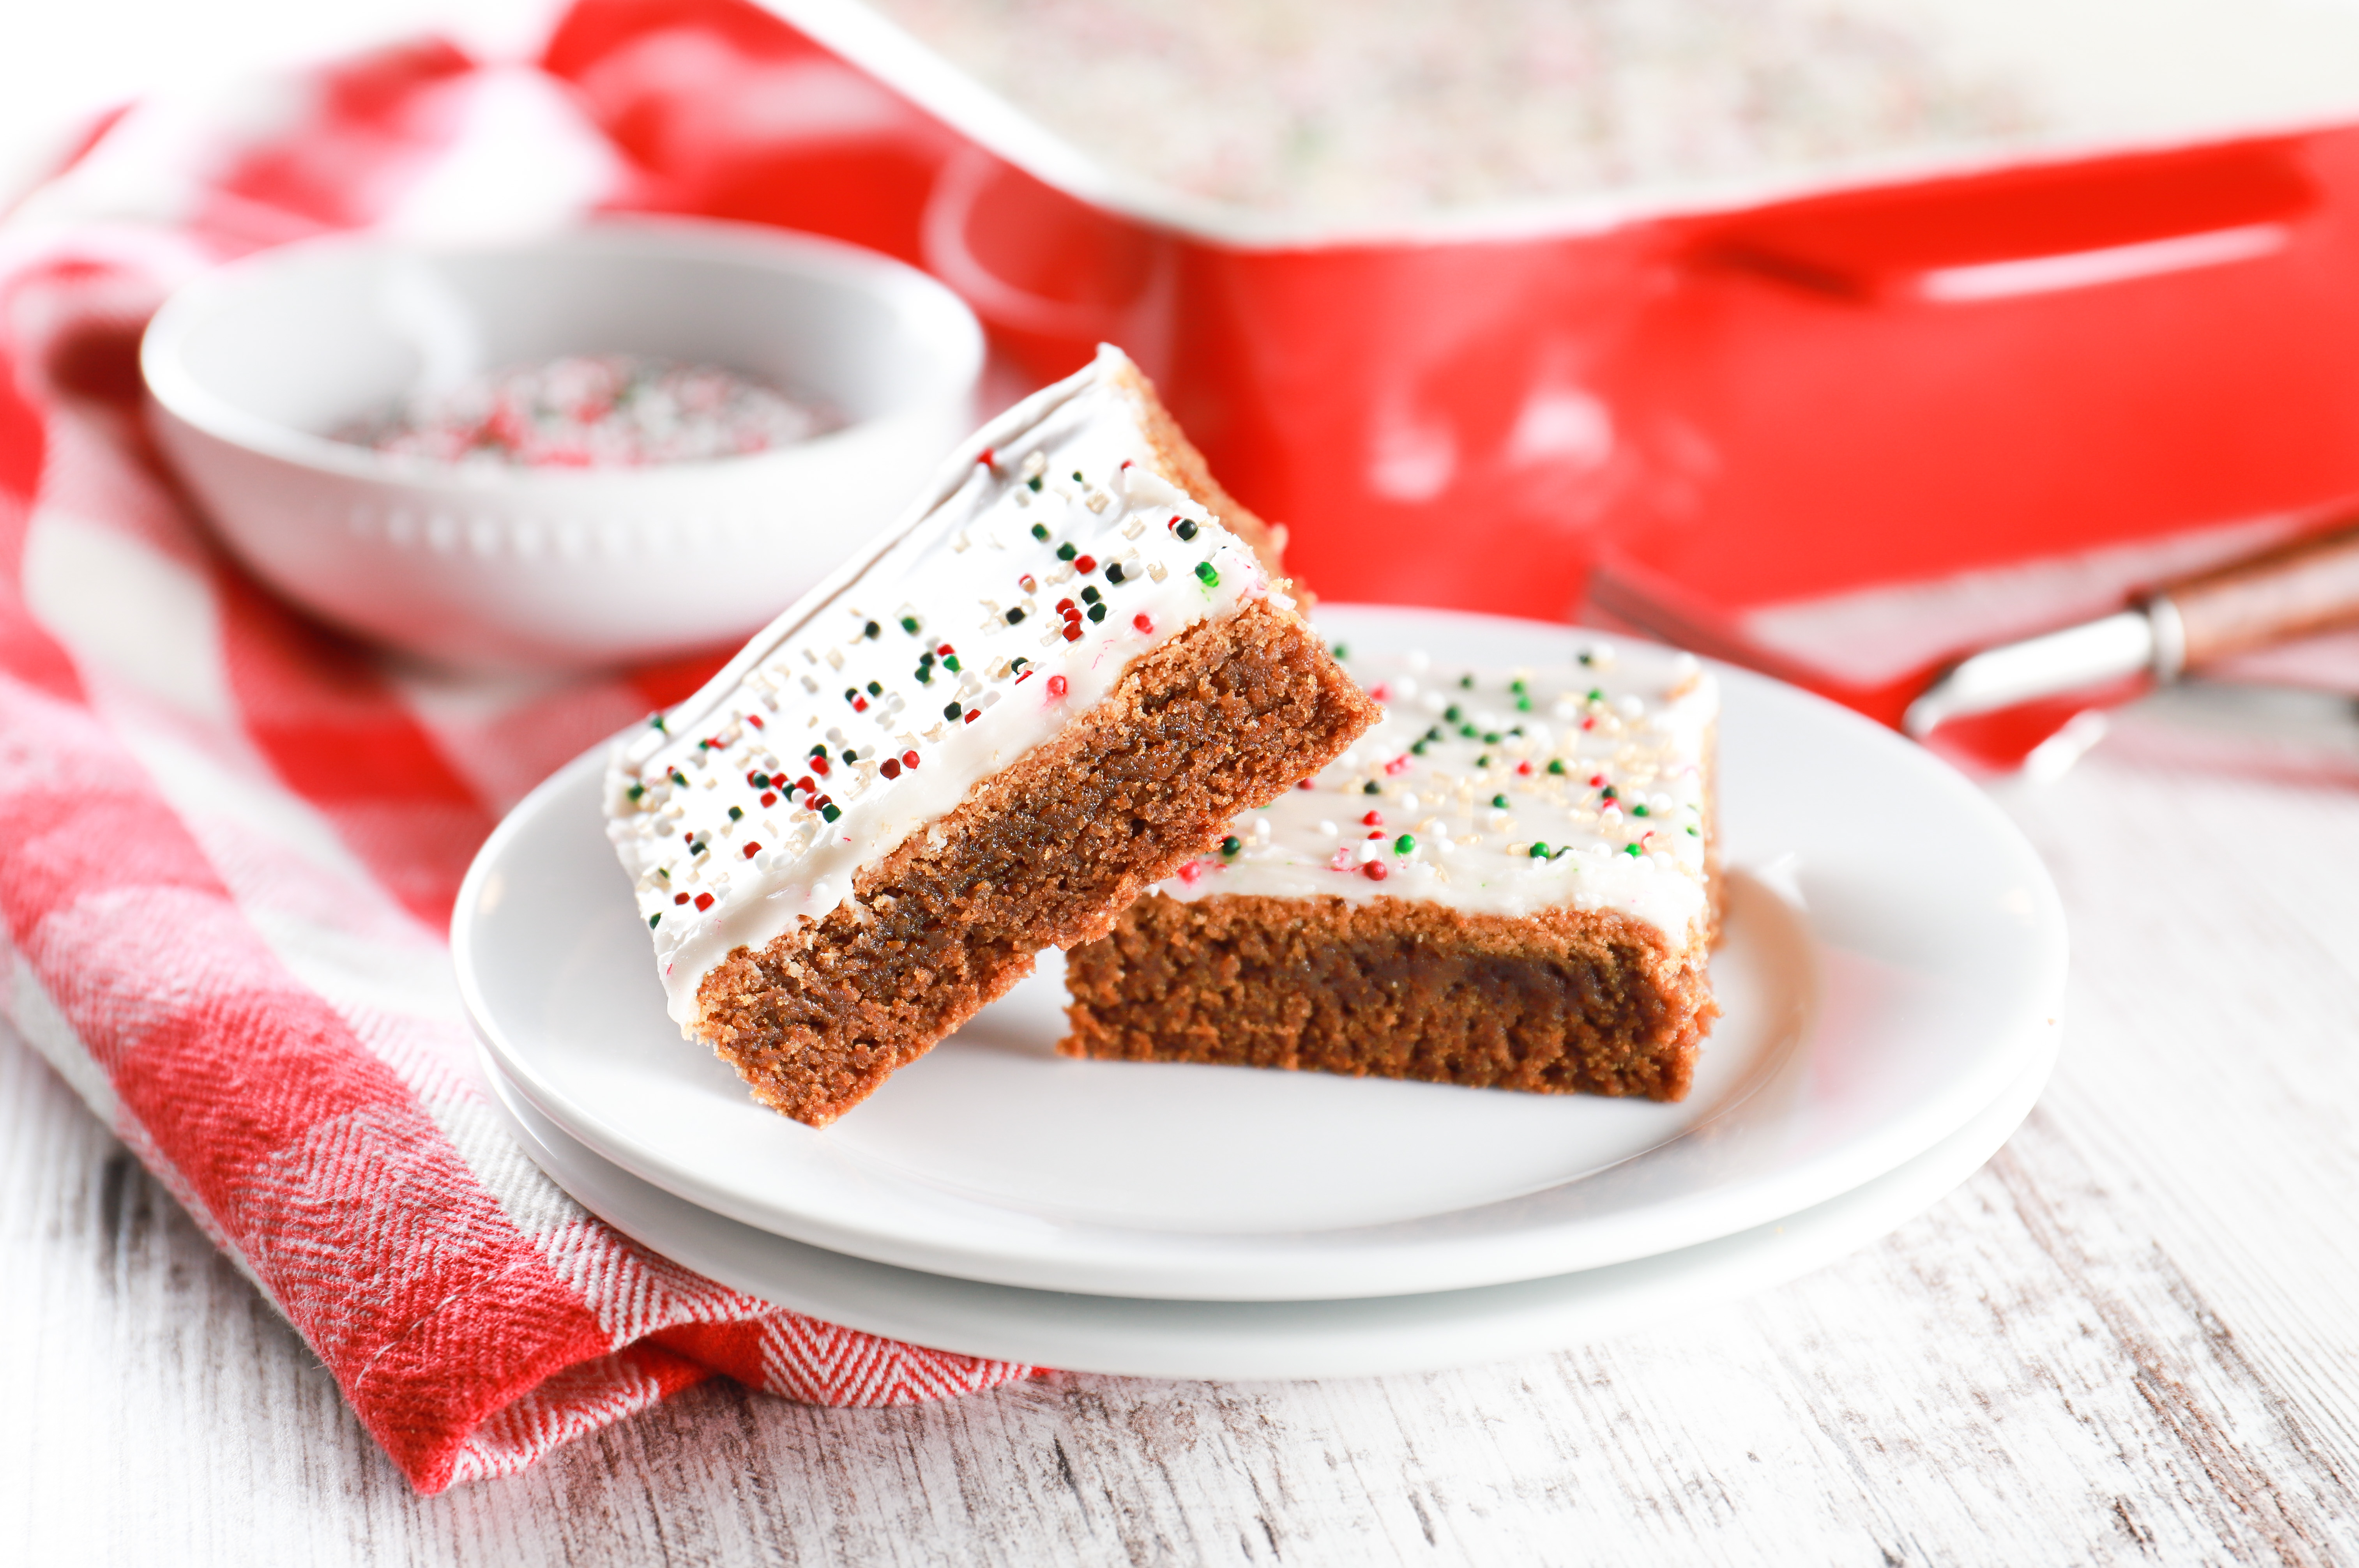 Two soft baked gingerbread bars on a small white plate with a baking dish with the remainder of the bars in the background.